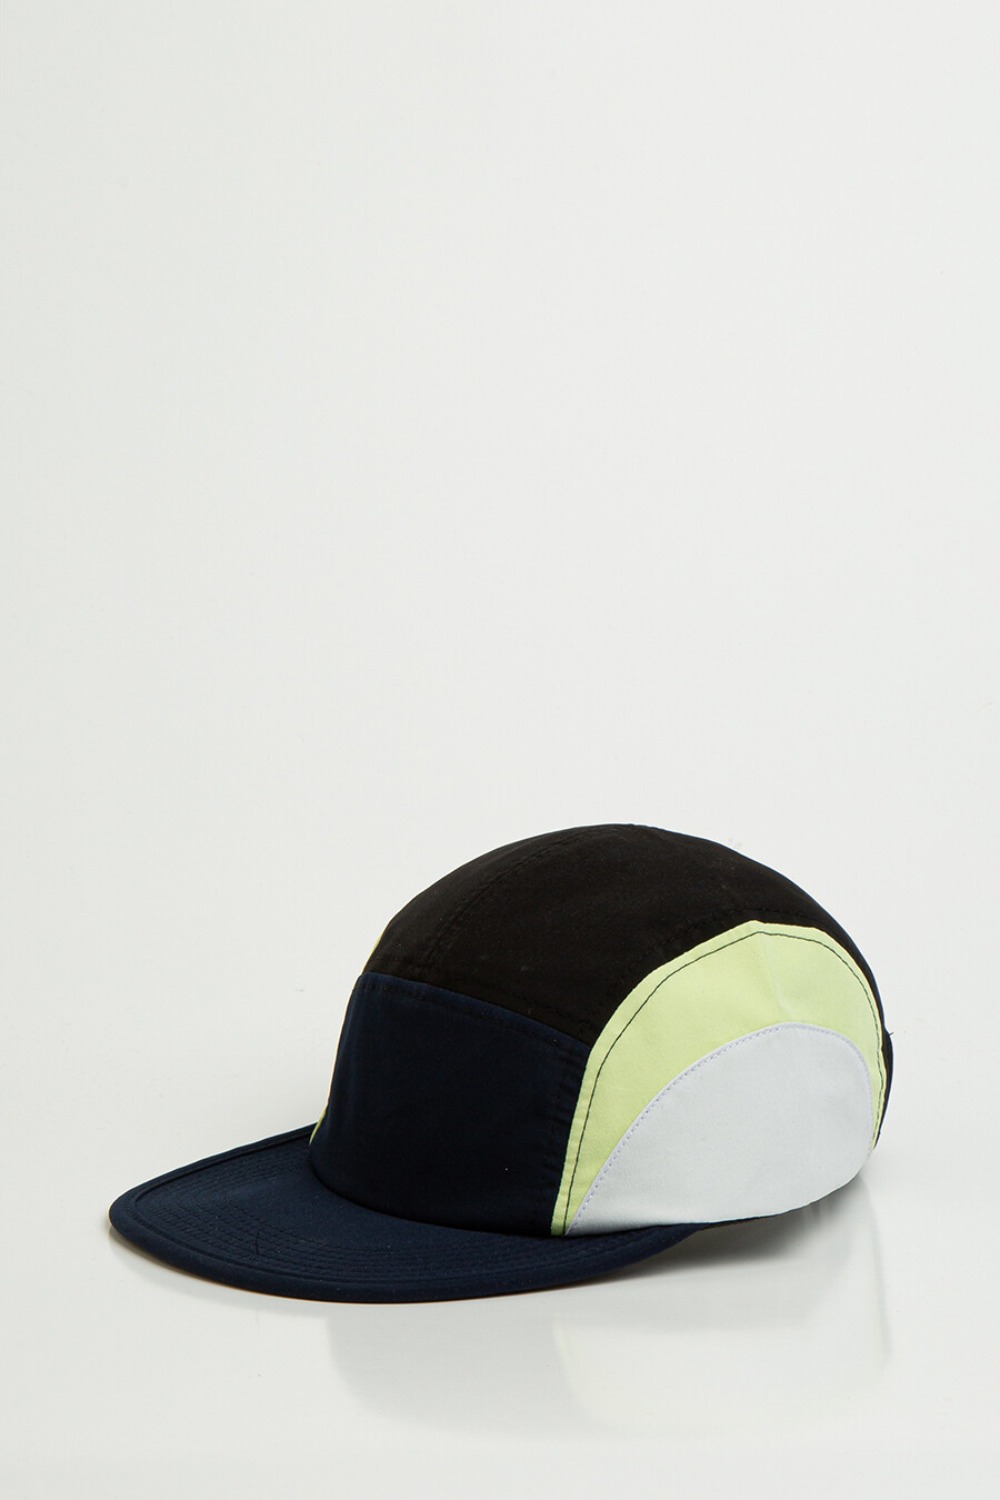 CRESENT CAMP CAP NAVY/LIME/WHITE